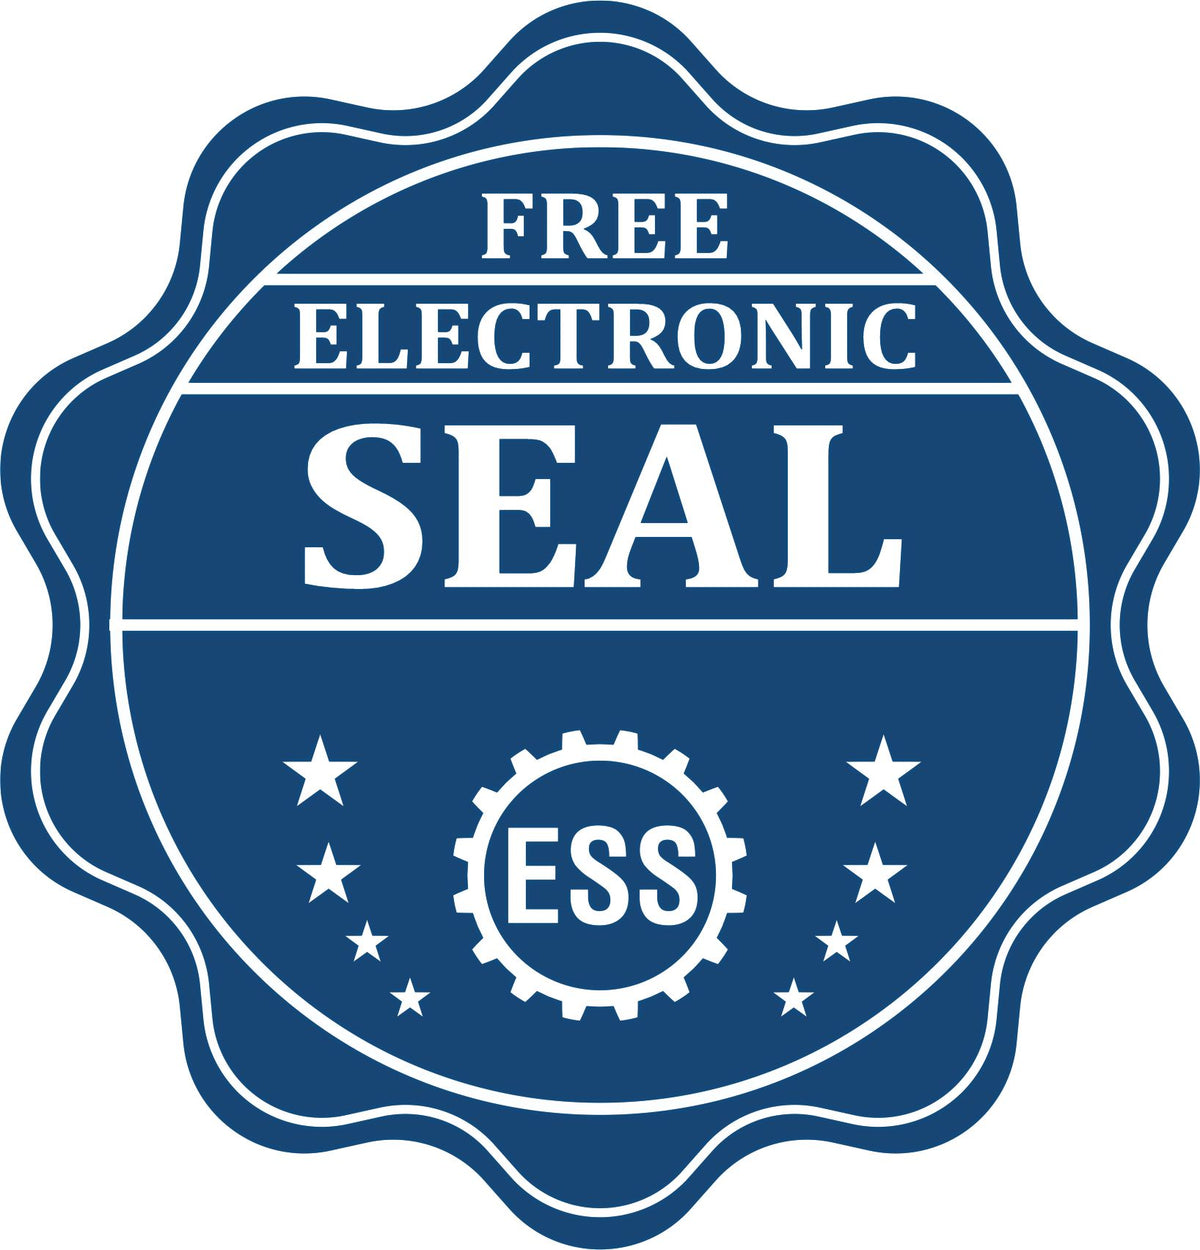 A badge showing a free electronic seal for the Guam Geologist Desk Seal with stars and the ESS gear on the emblem.